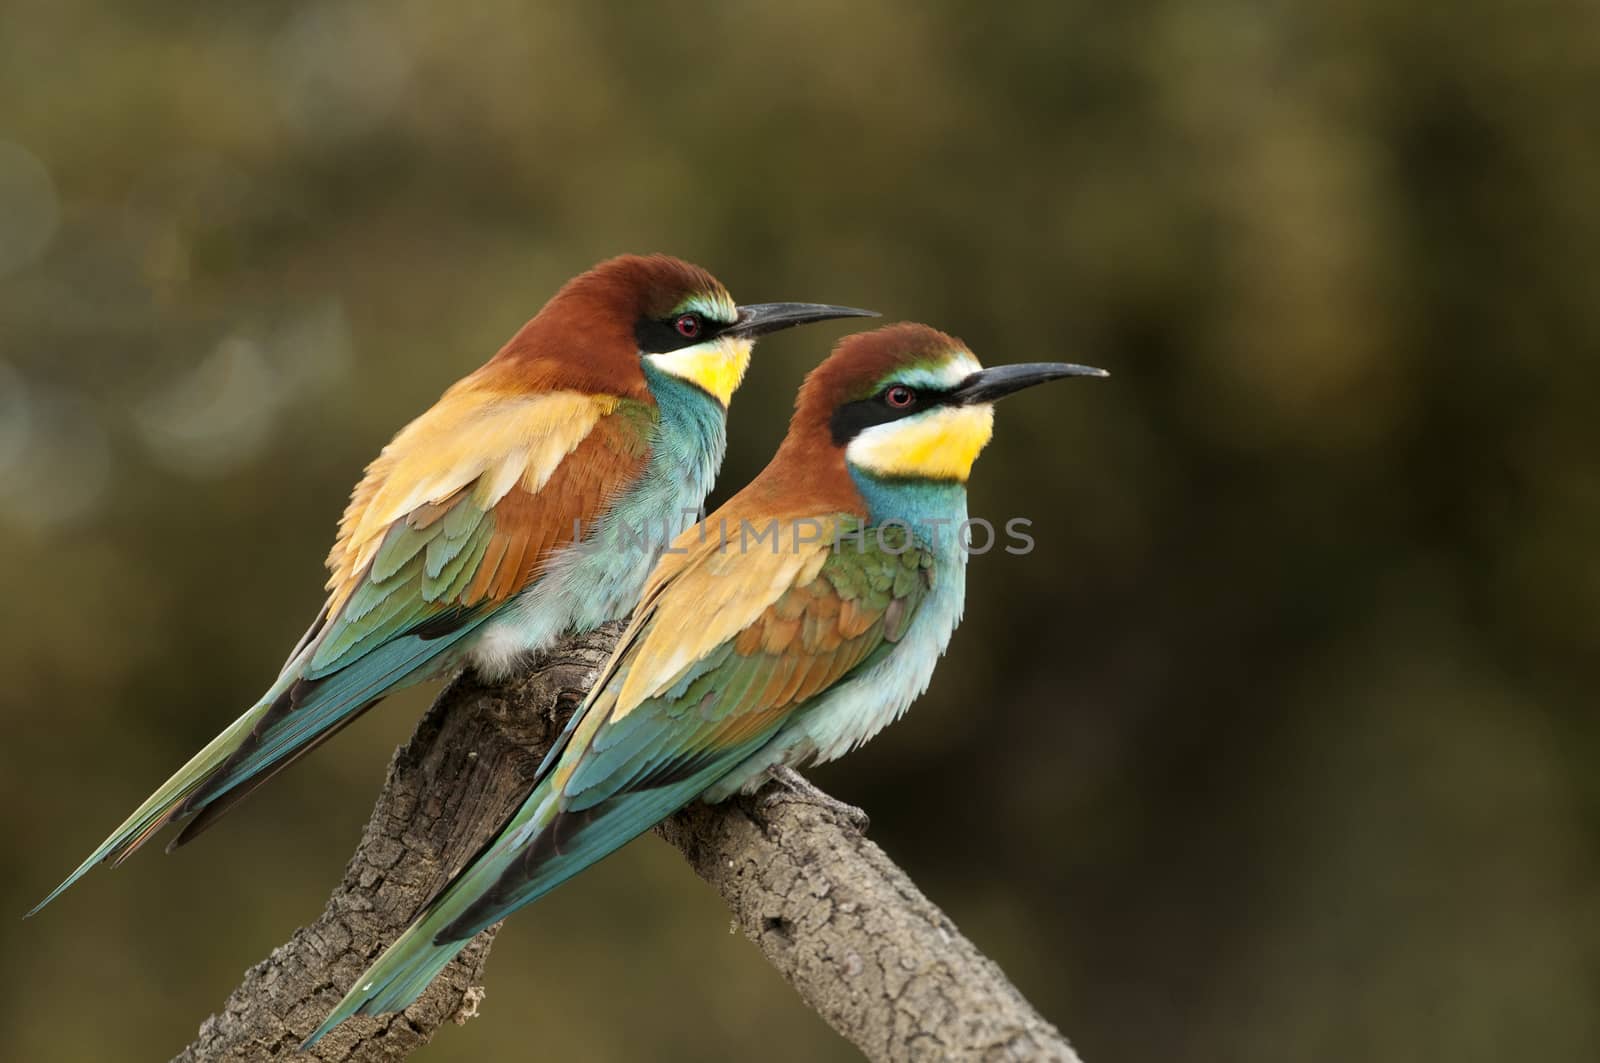 European bee-eater (Merops apiaster), couple perched on a branch by jalonsohu@gmail.com